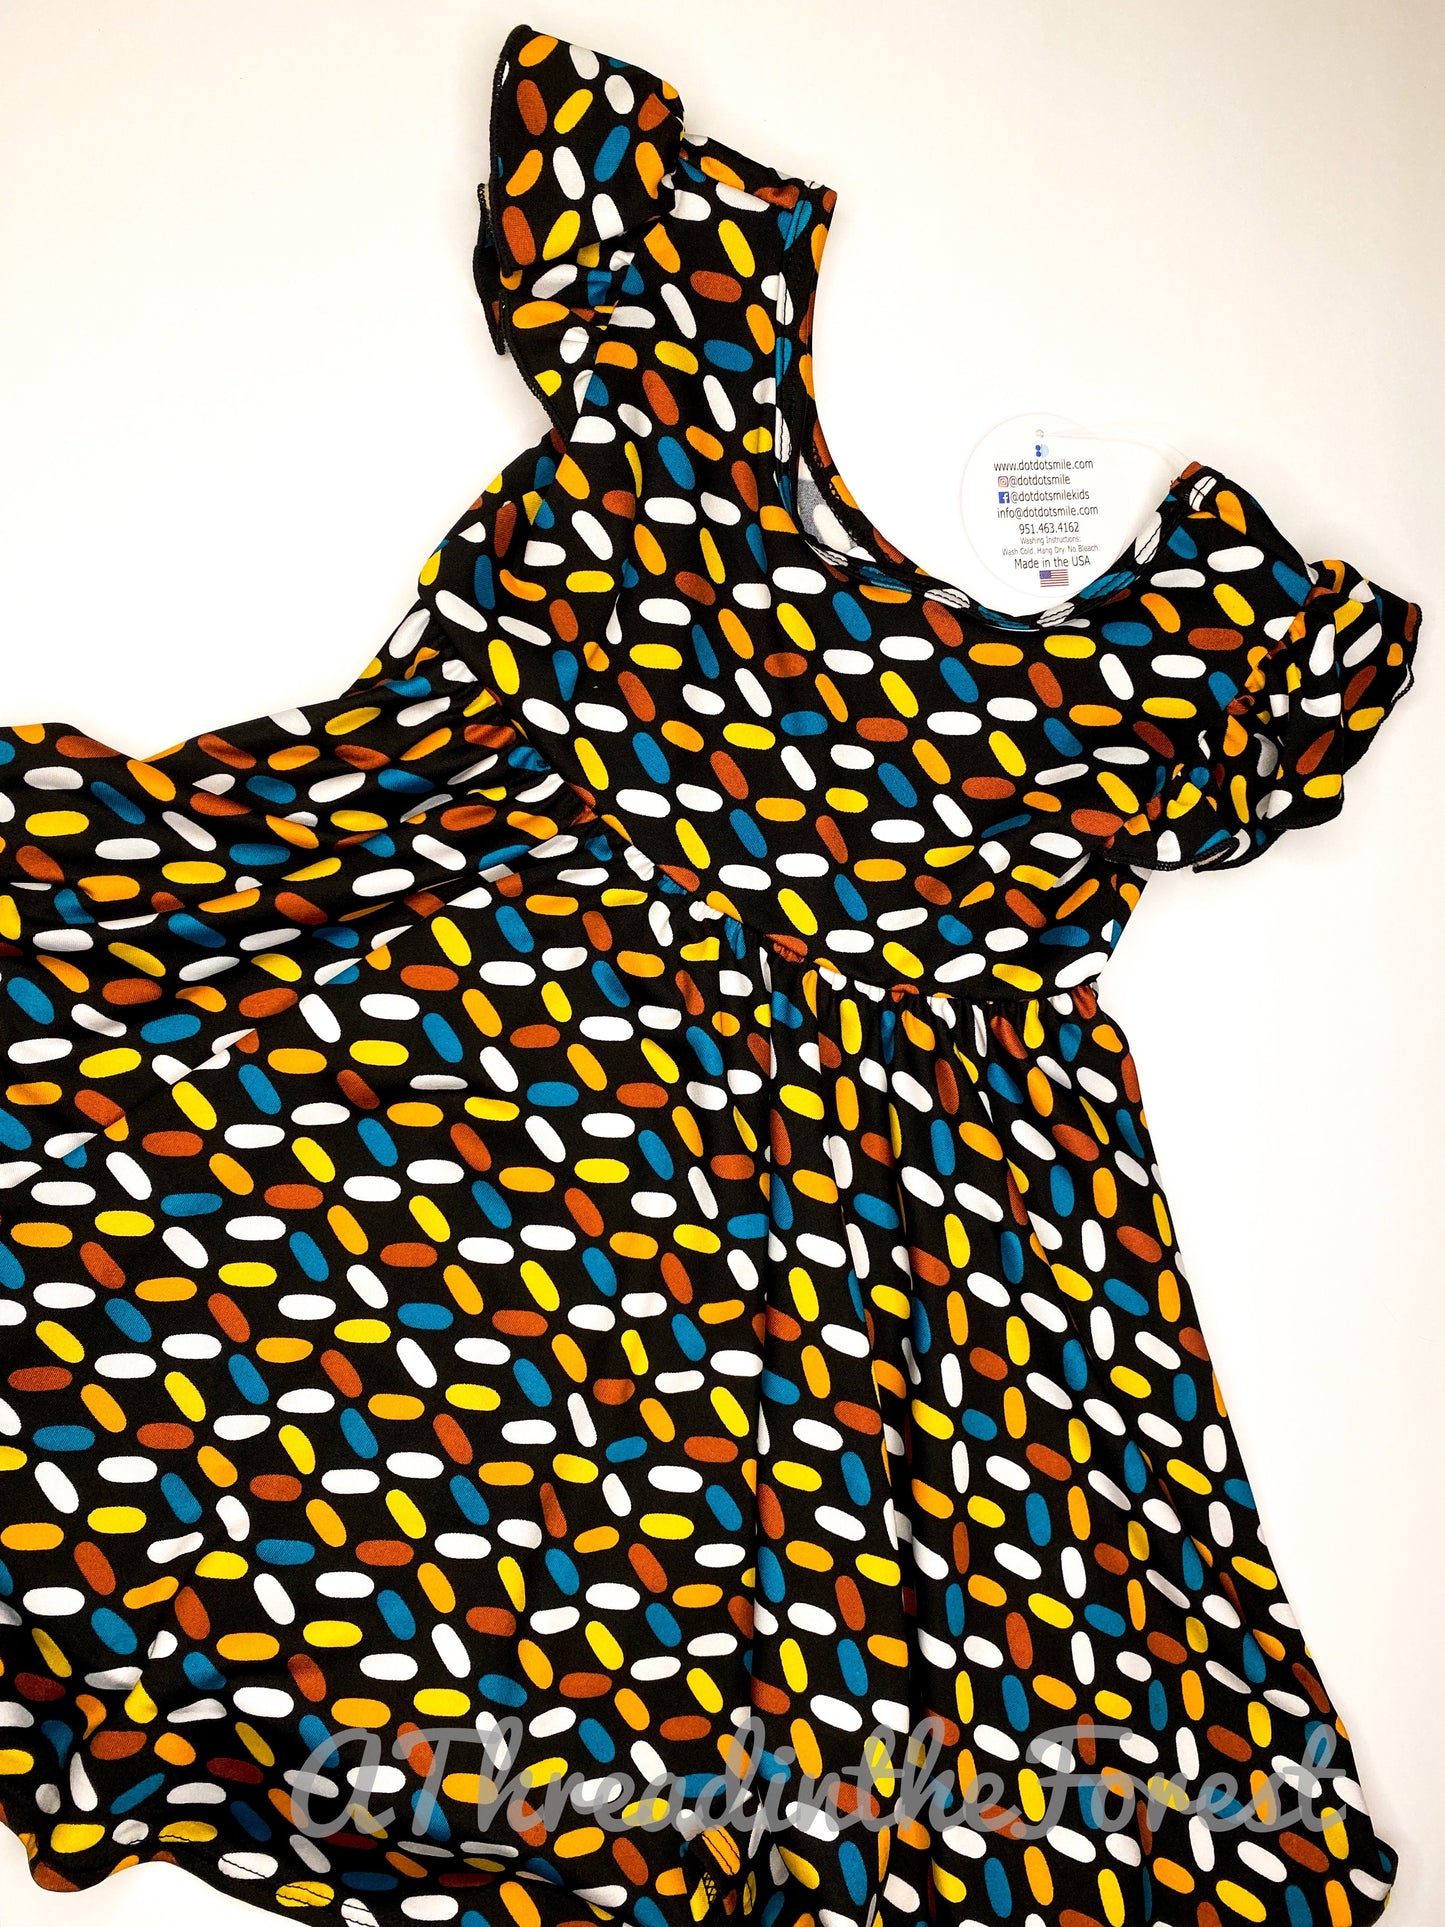 Black Dress with Teal, white, orange, yellow ovals Size 2T - Empire Style Dress